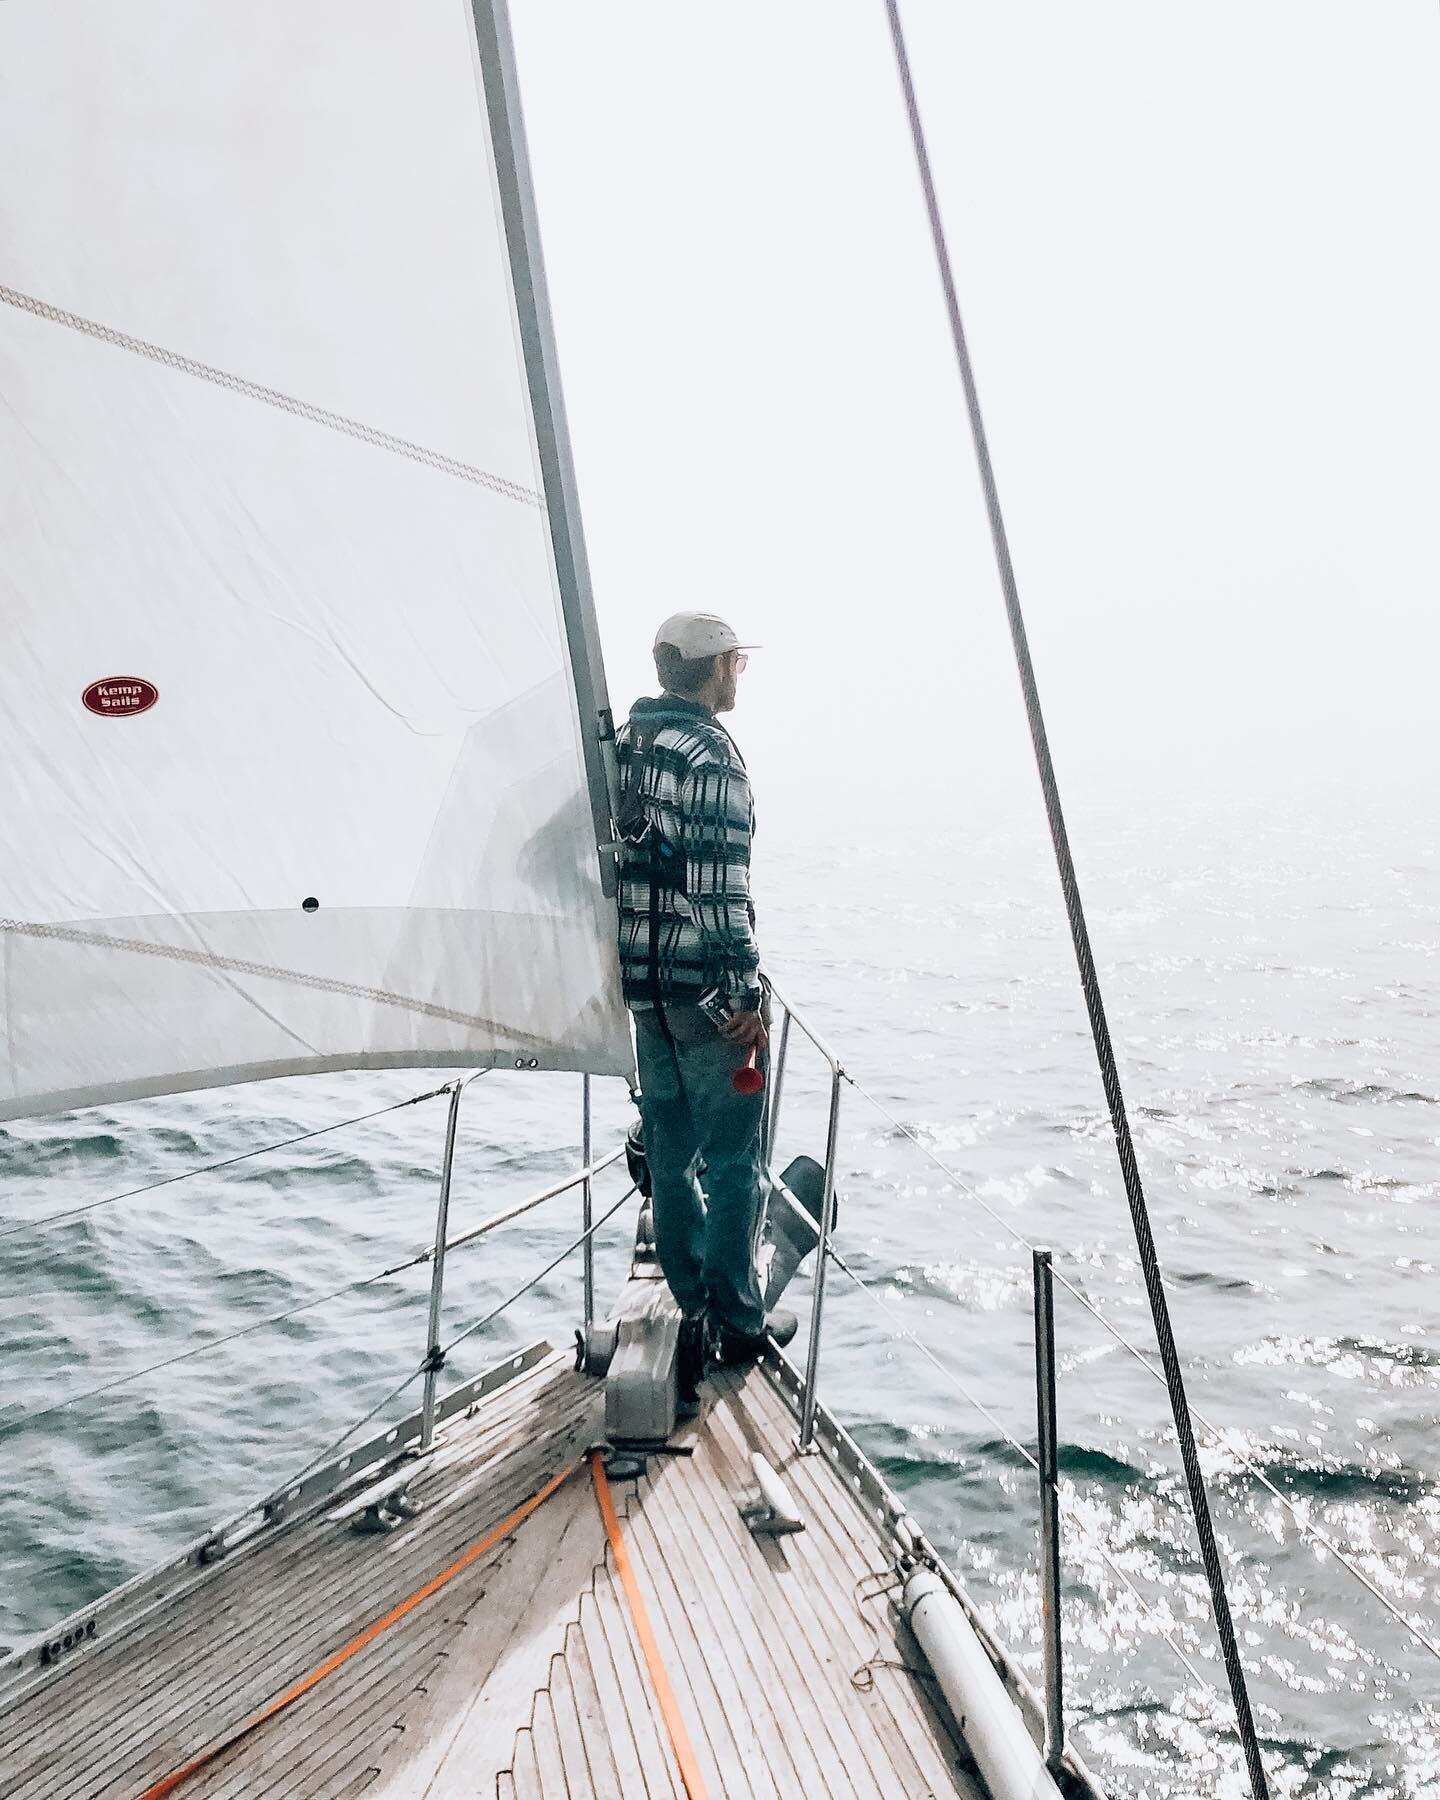 In our last post, we spoke about this so called &lsquo;gap&rsquo; in the fog, well, that lasted all of 10 minutes and we were catapulted into the disorientating and unnerving experience of fog sailing. But, it was fine! We had the air horn at the rea